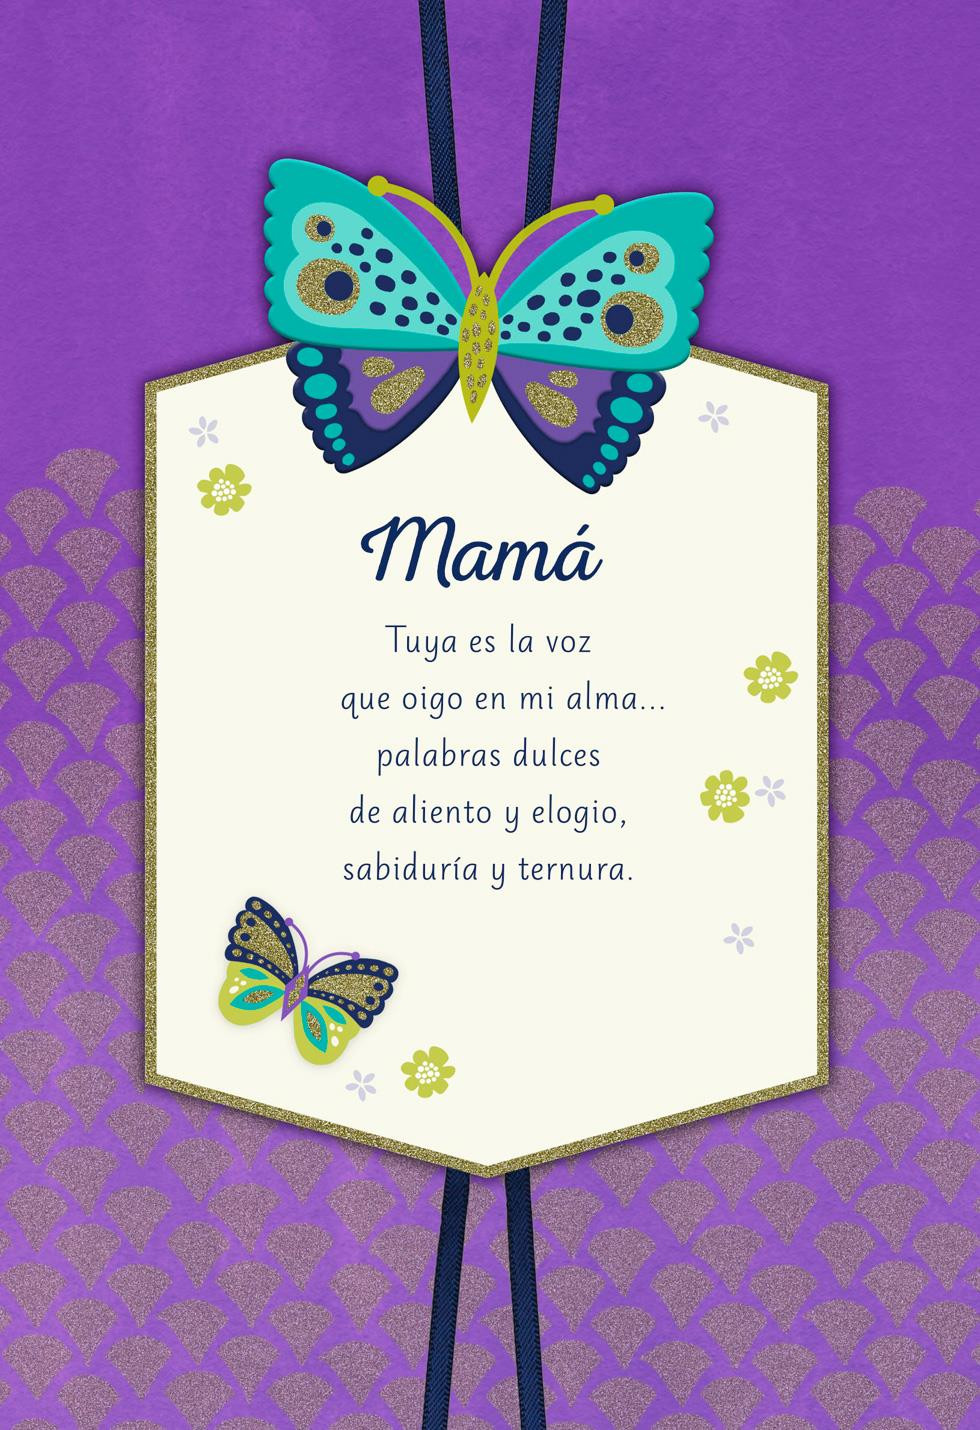 Birthday Cards In Spanish
 Your Voice Spanish Language Birthday Card for Mom